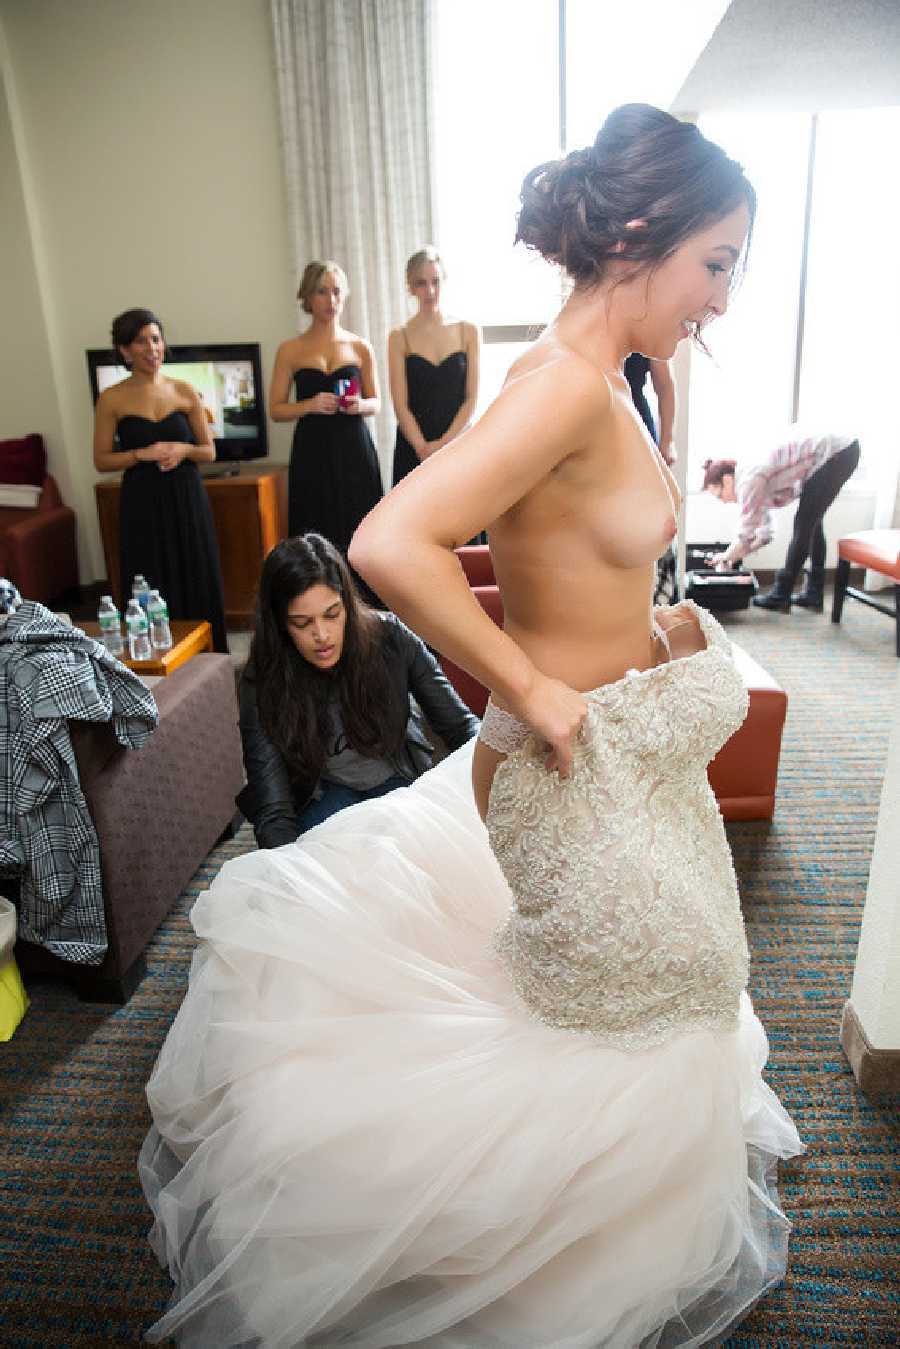 Topless Bride getting Changed